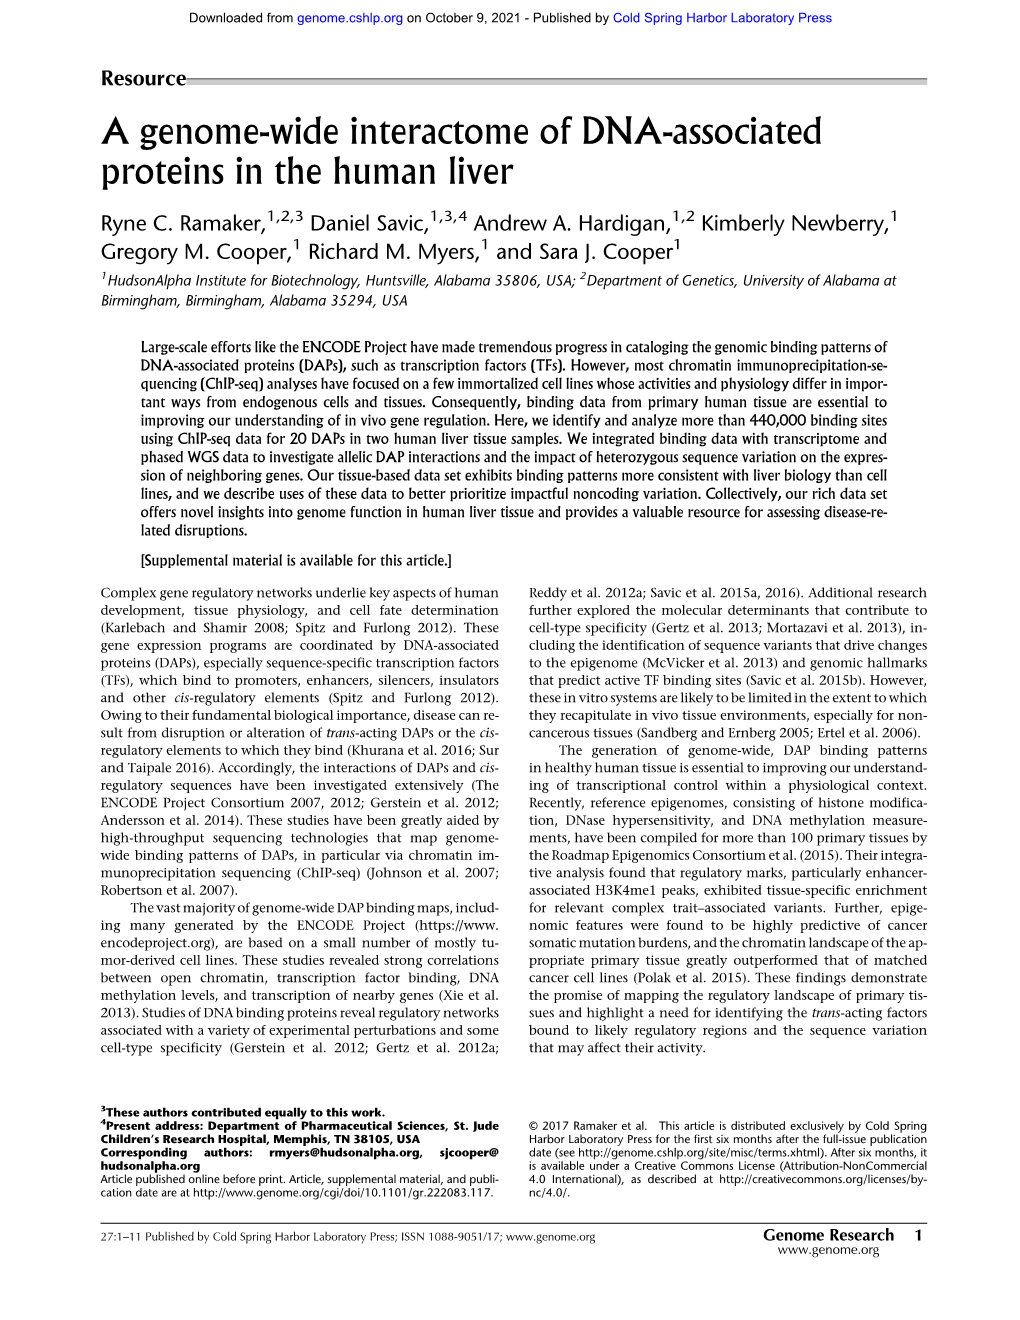 A Genome-Wide Interactome of DNA-Associated Proteins in the Human Liver